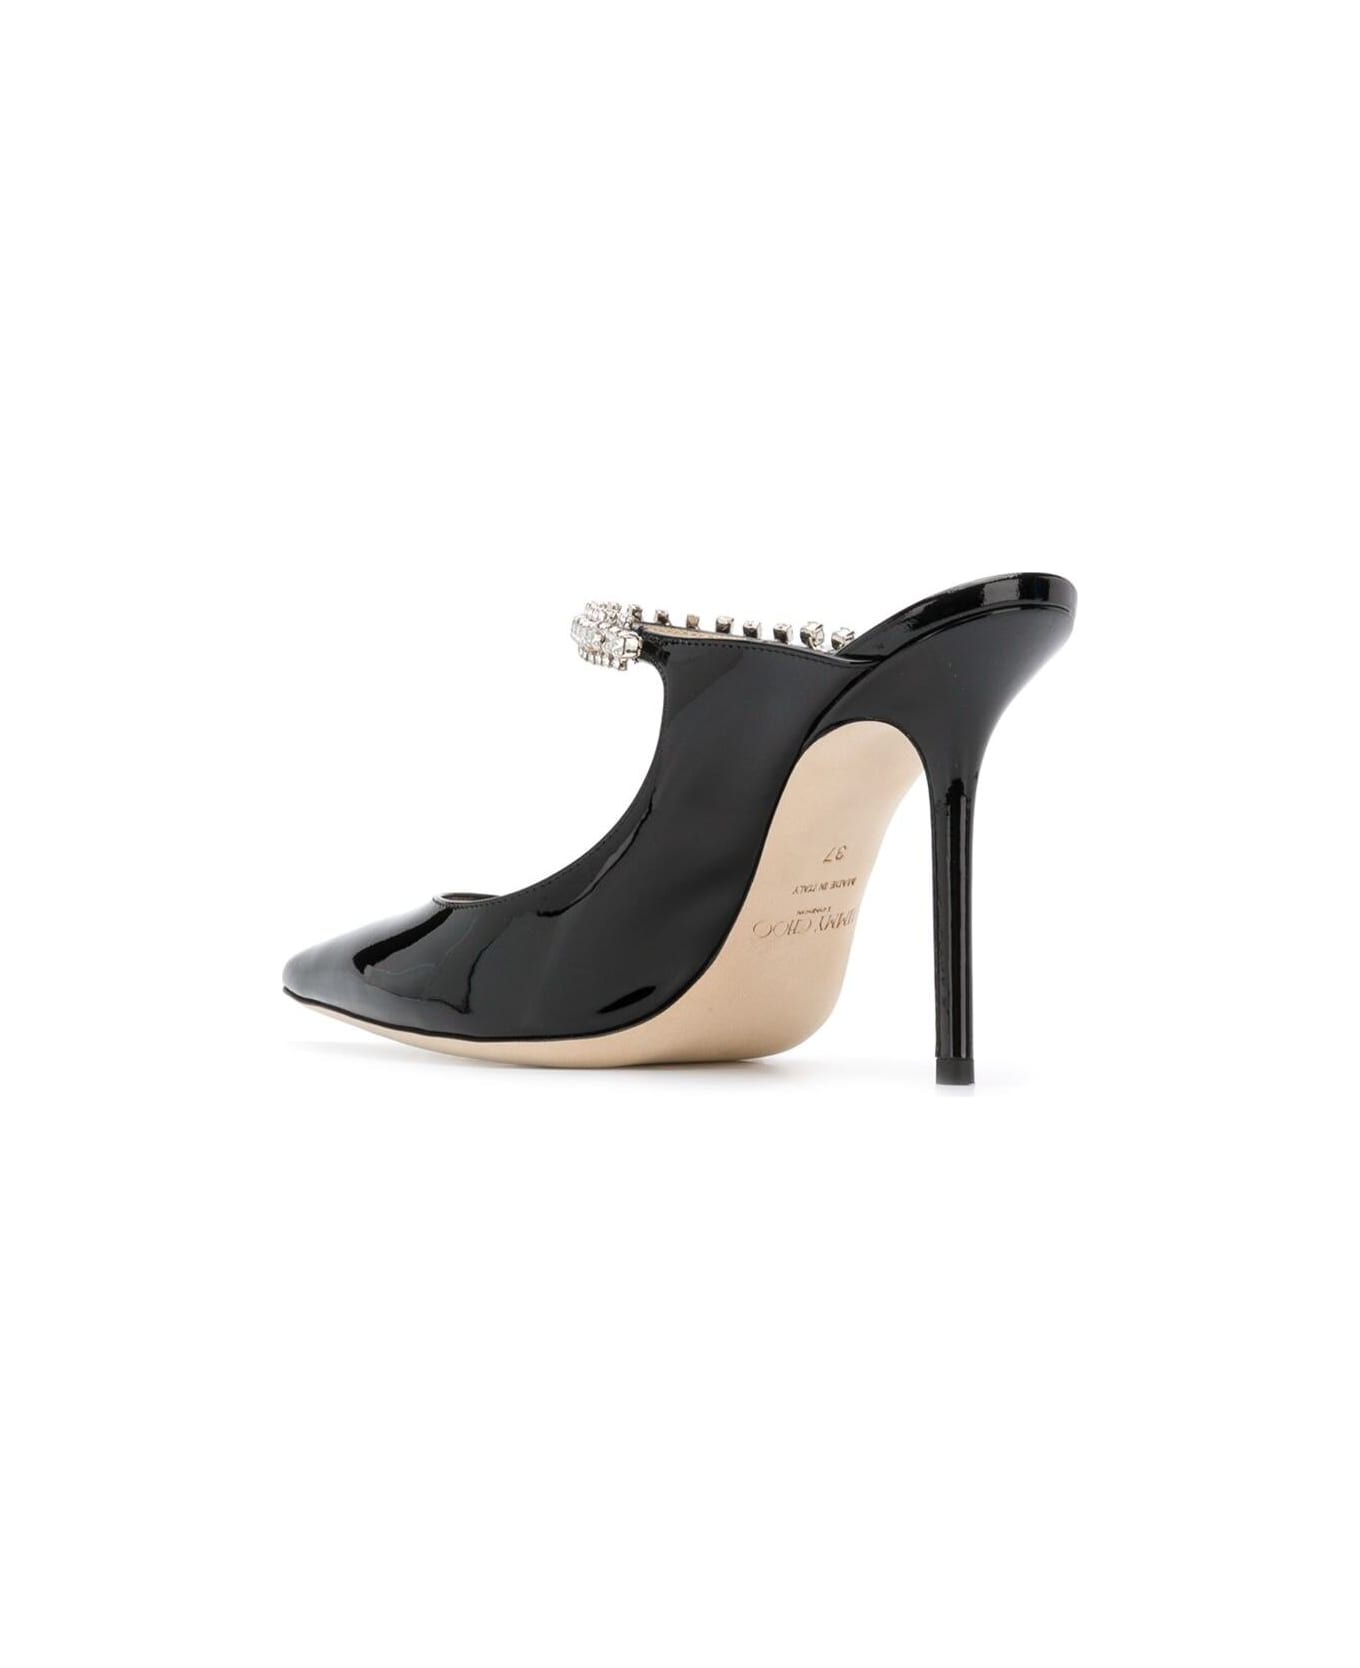 Jimmy Choo Black Pumps With Crystal Strap In Patent Leather Woman - Black